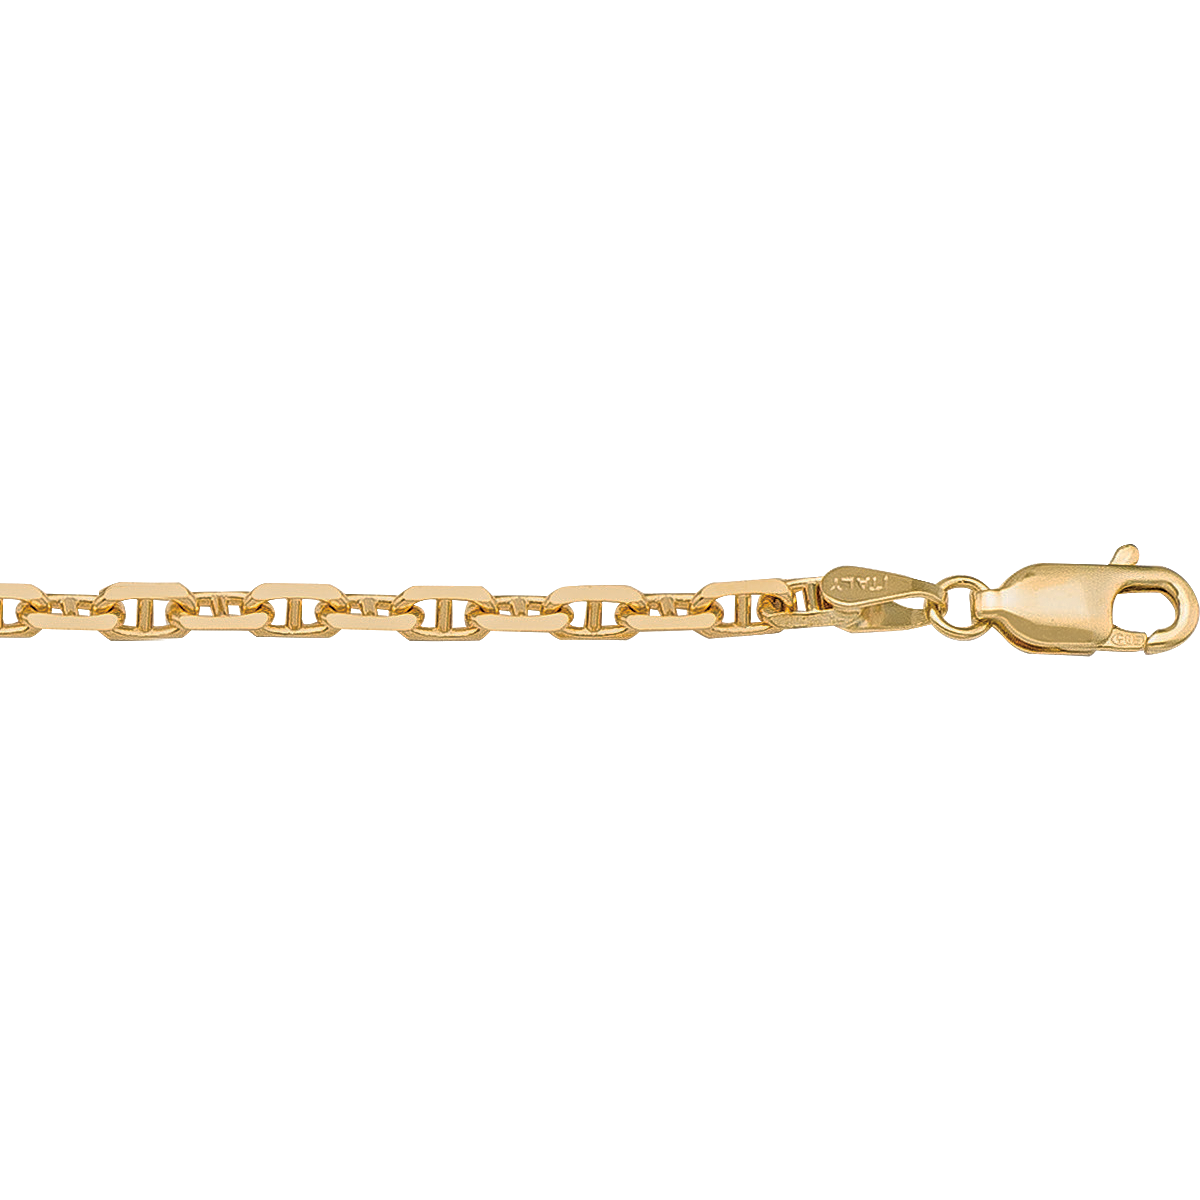 CANC01E, Gold Chain, Anchor, 3.5mm, Yellow or White Gold